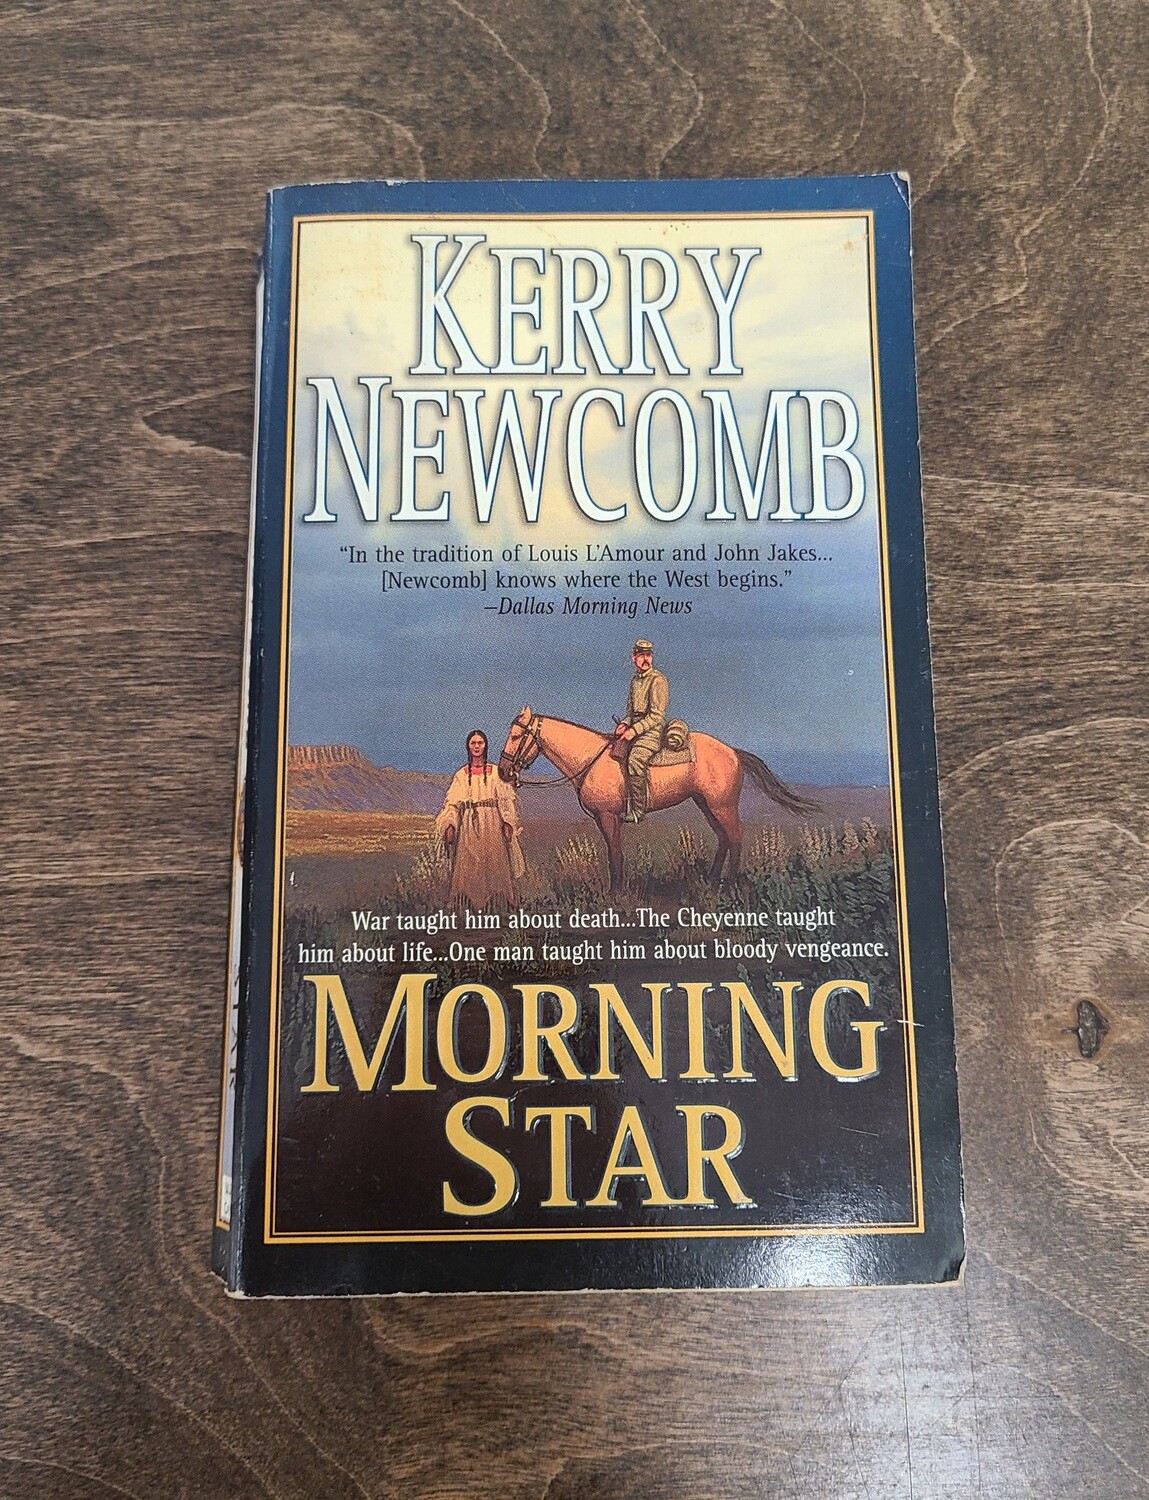 Morning Star by Kerry Newcomb